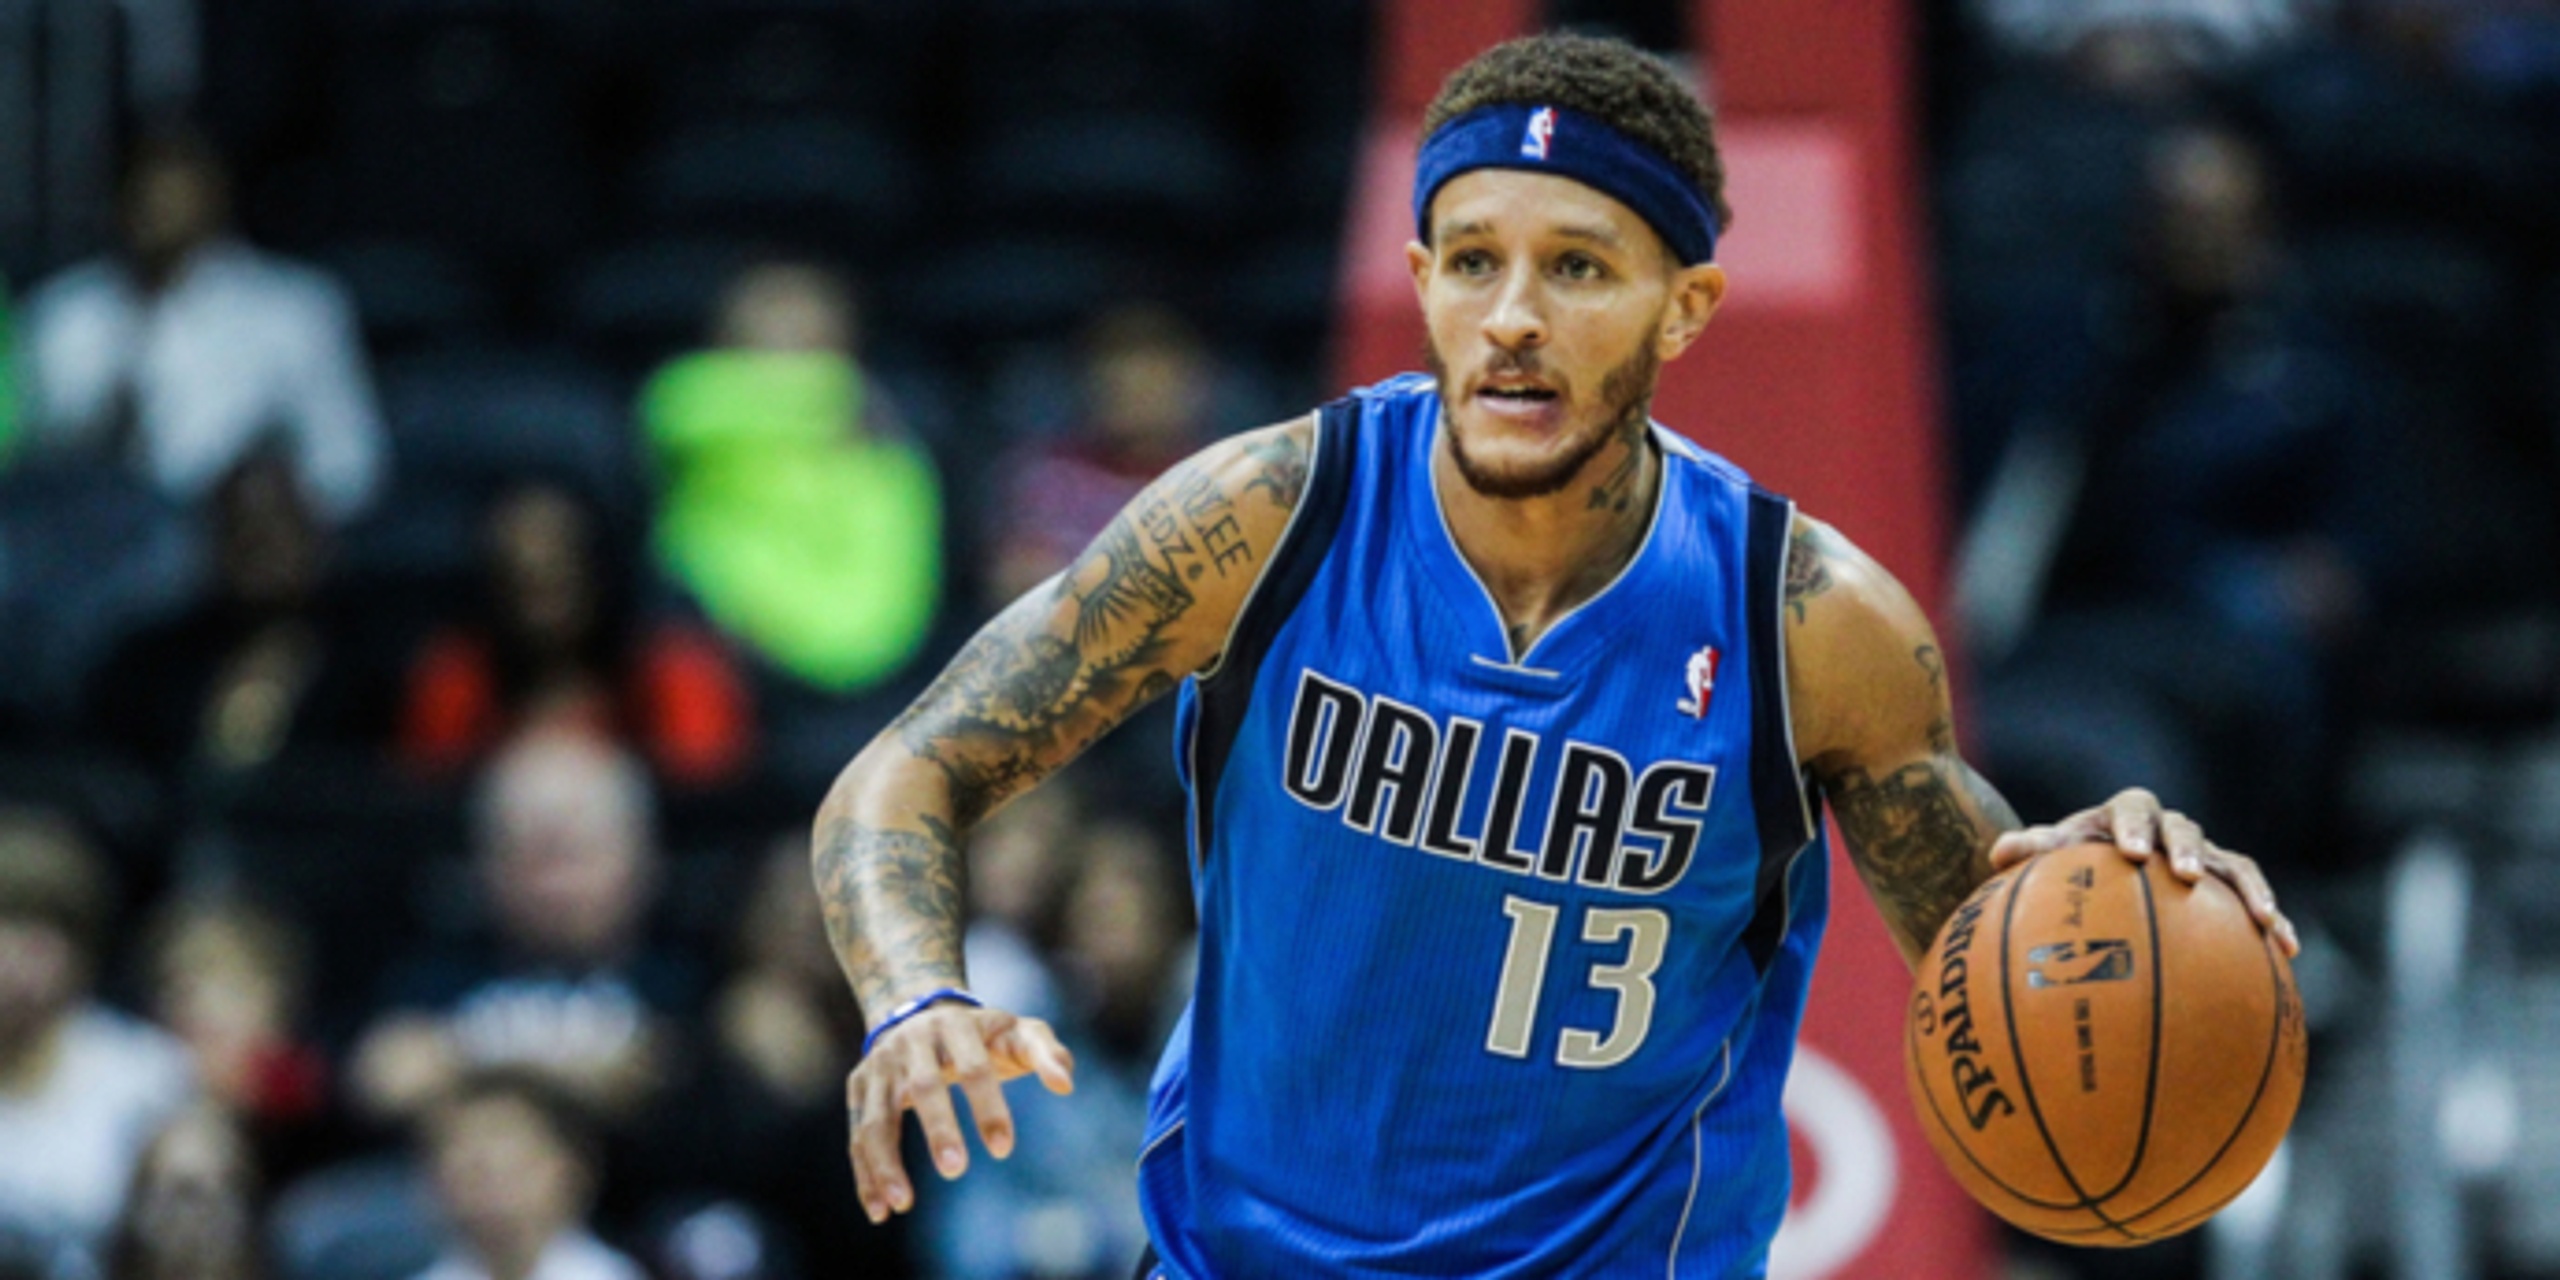 Cuban lends helping hand to Delonte West